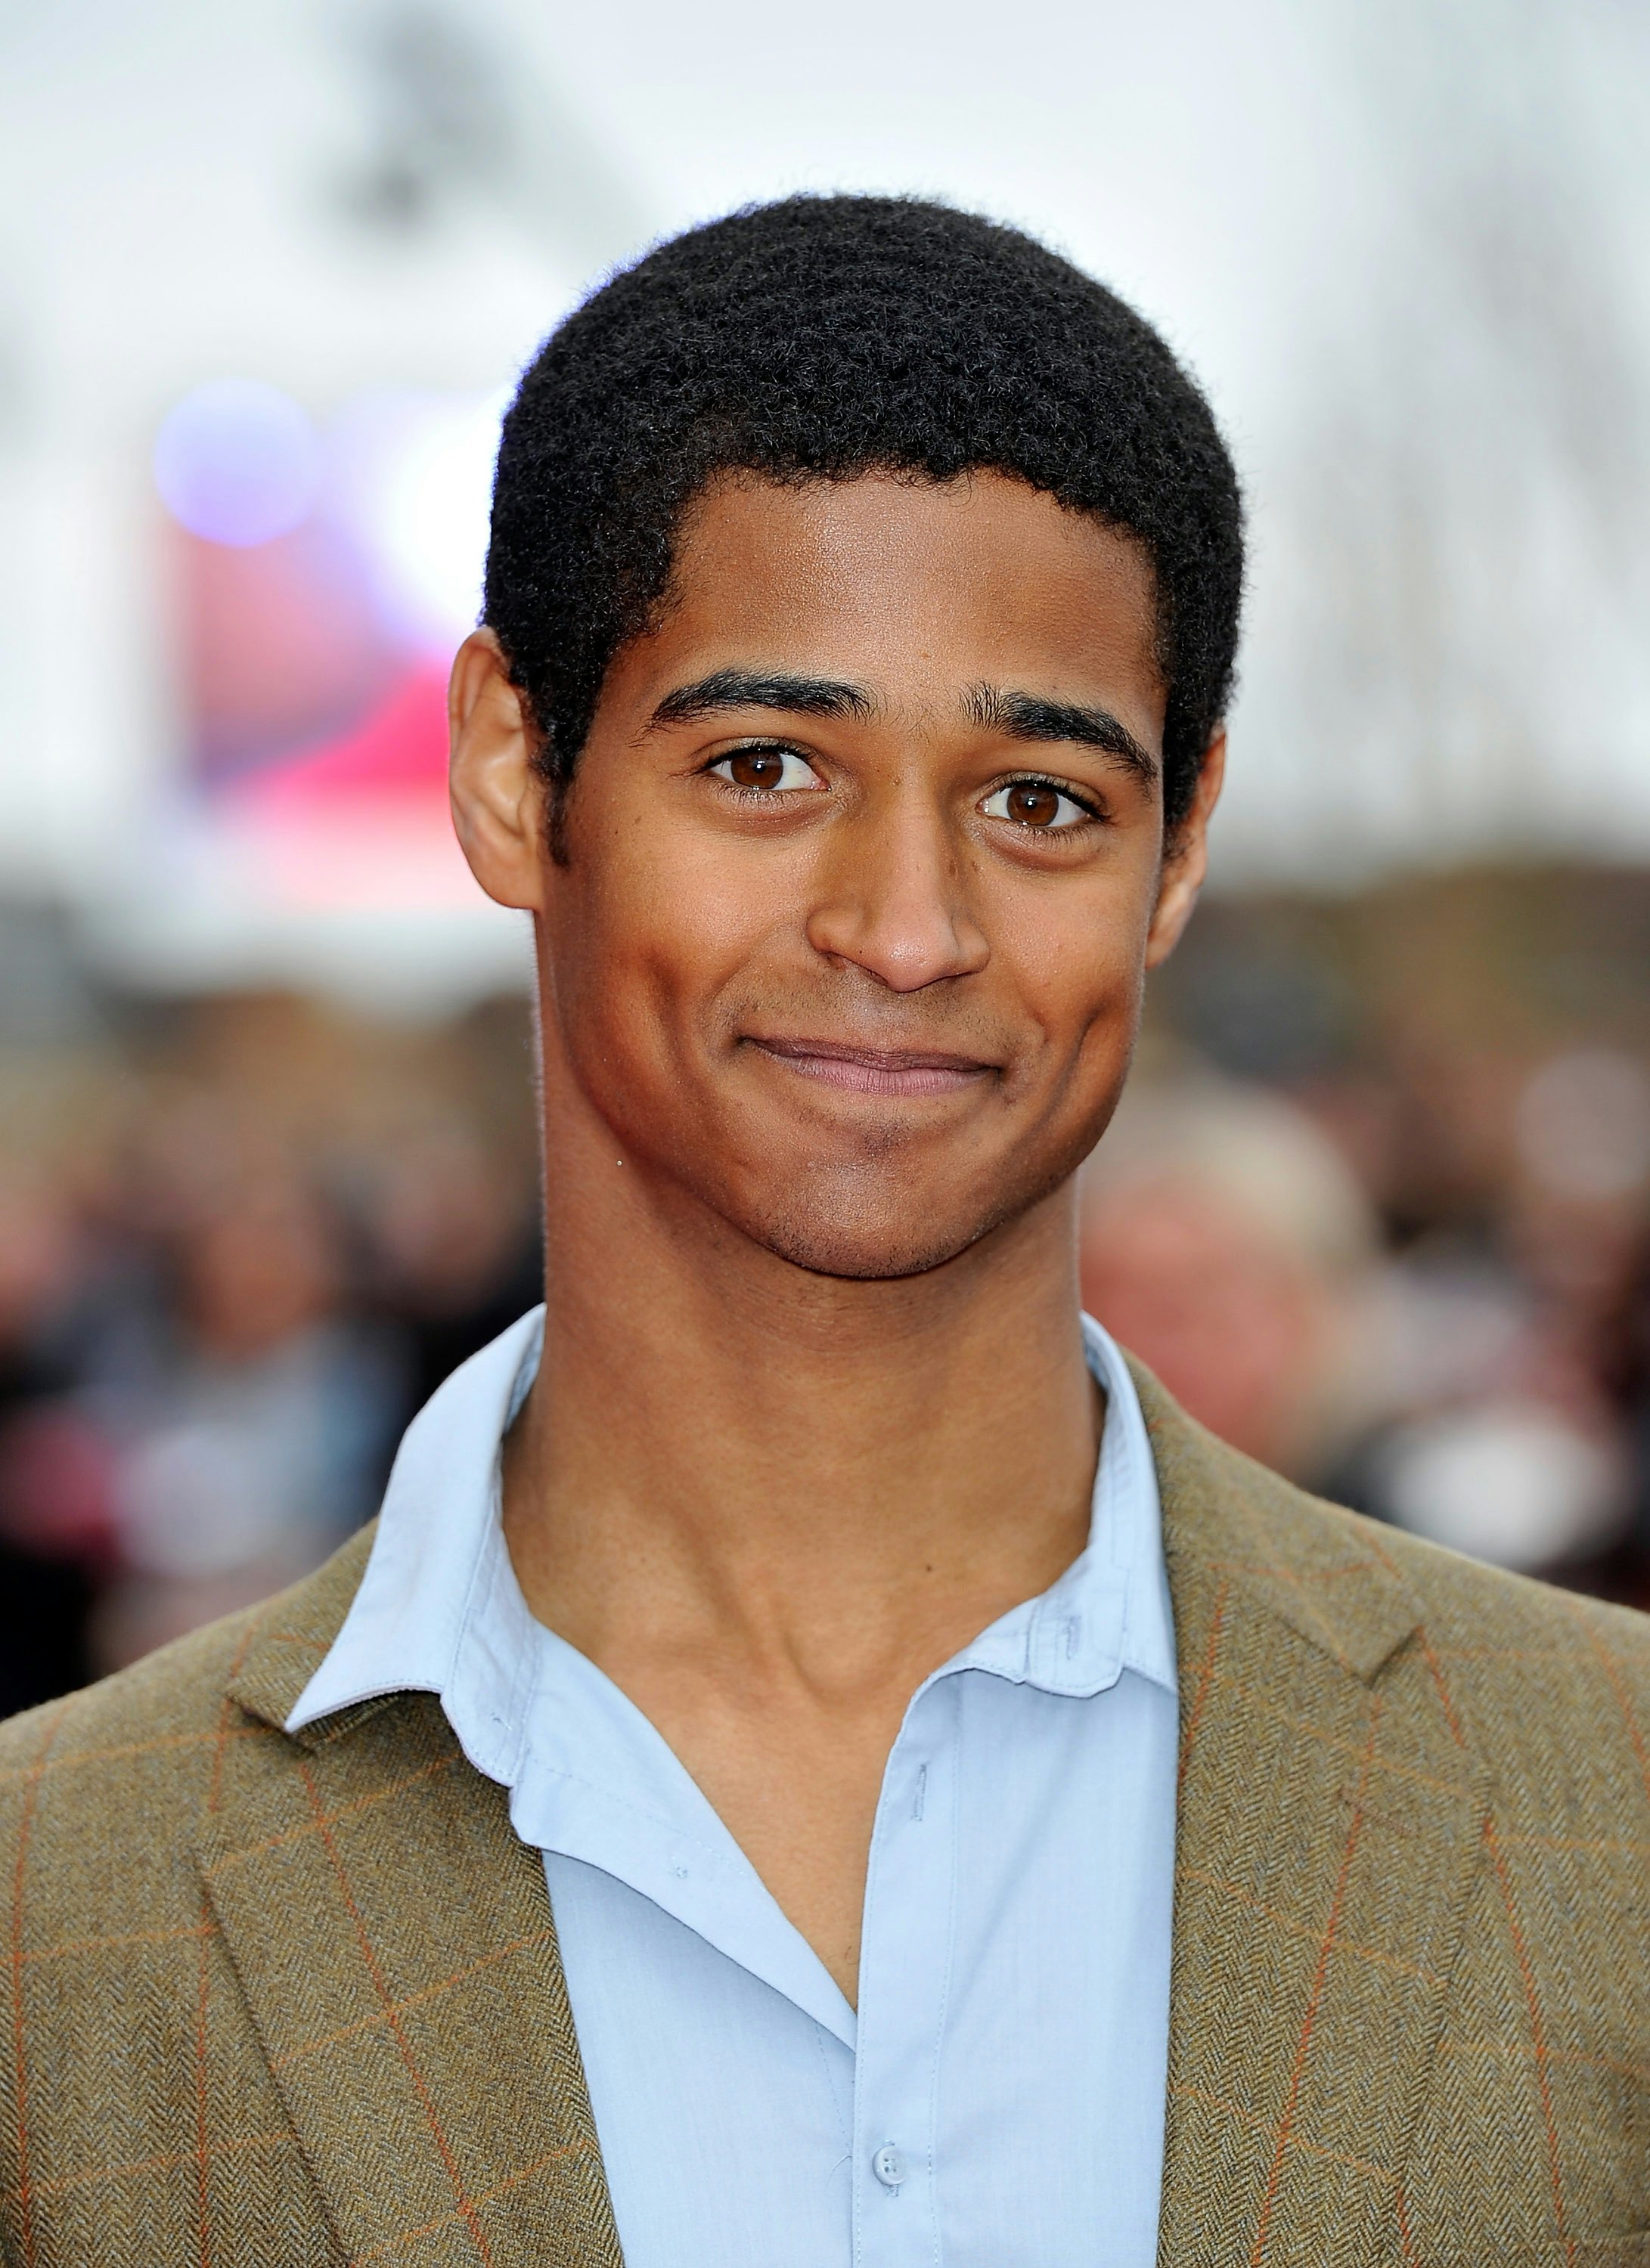 alfred enoch harry potter young